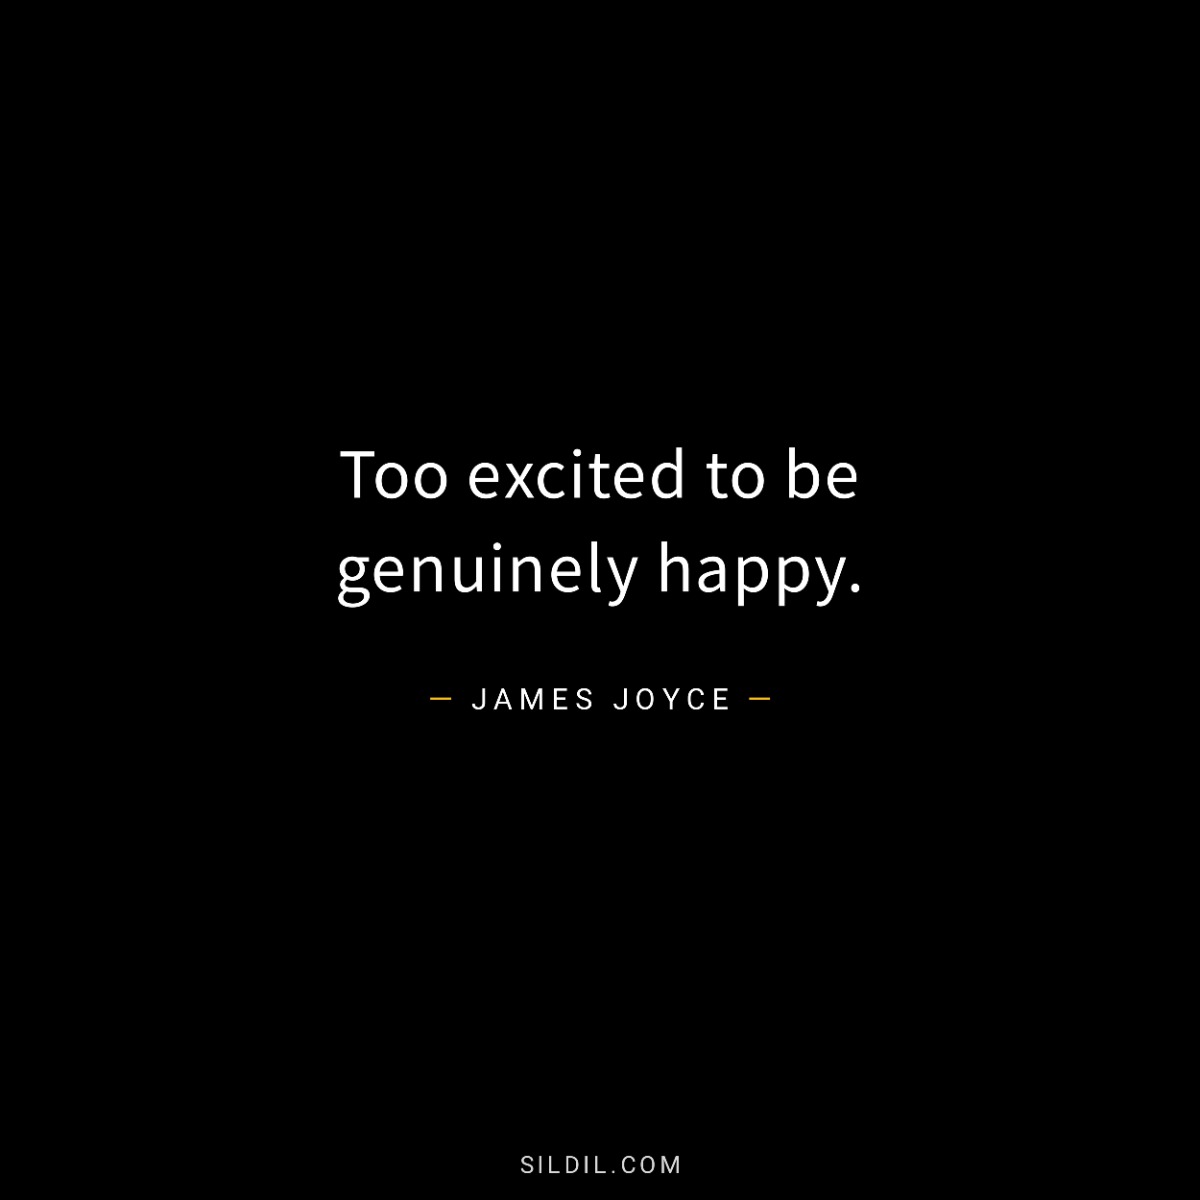 Too excited to be genuinely happy.